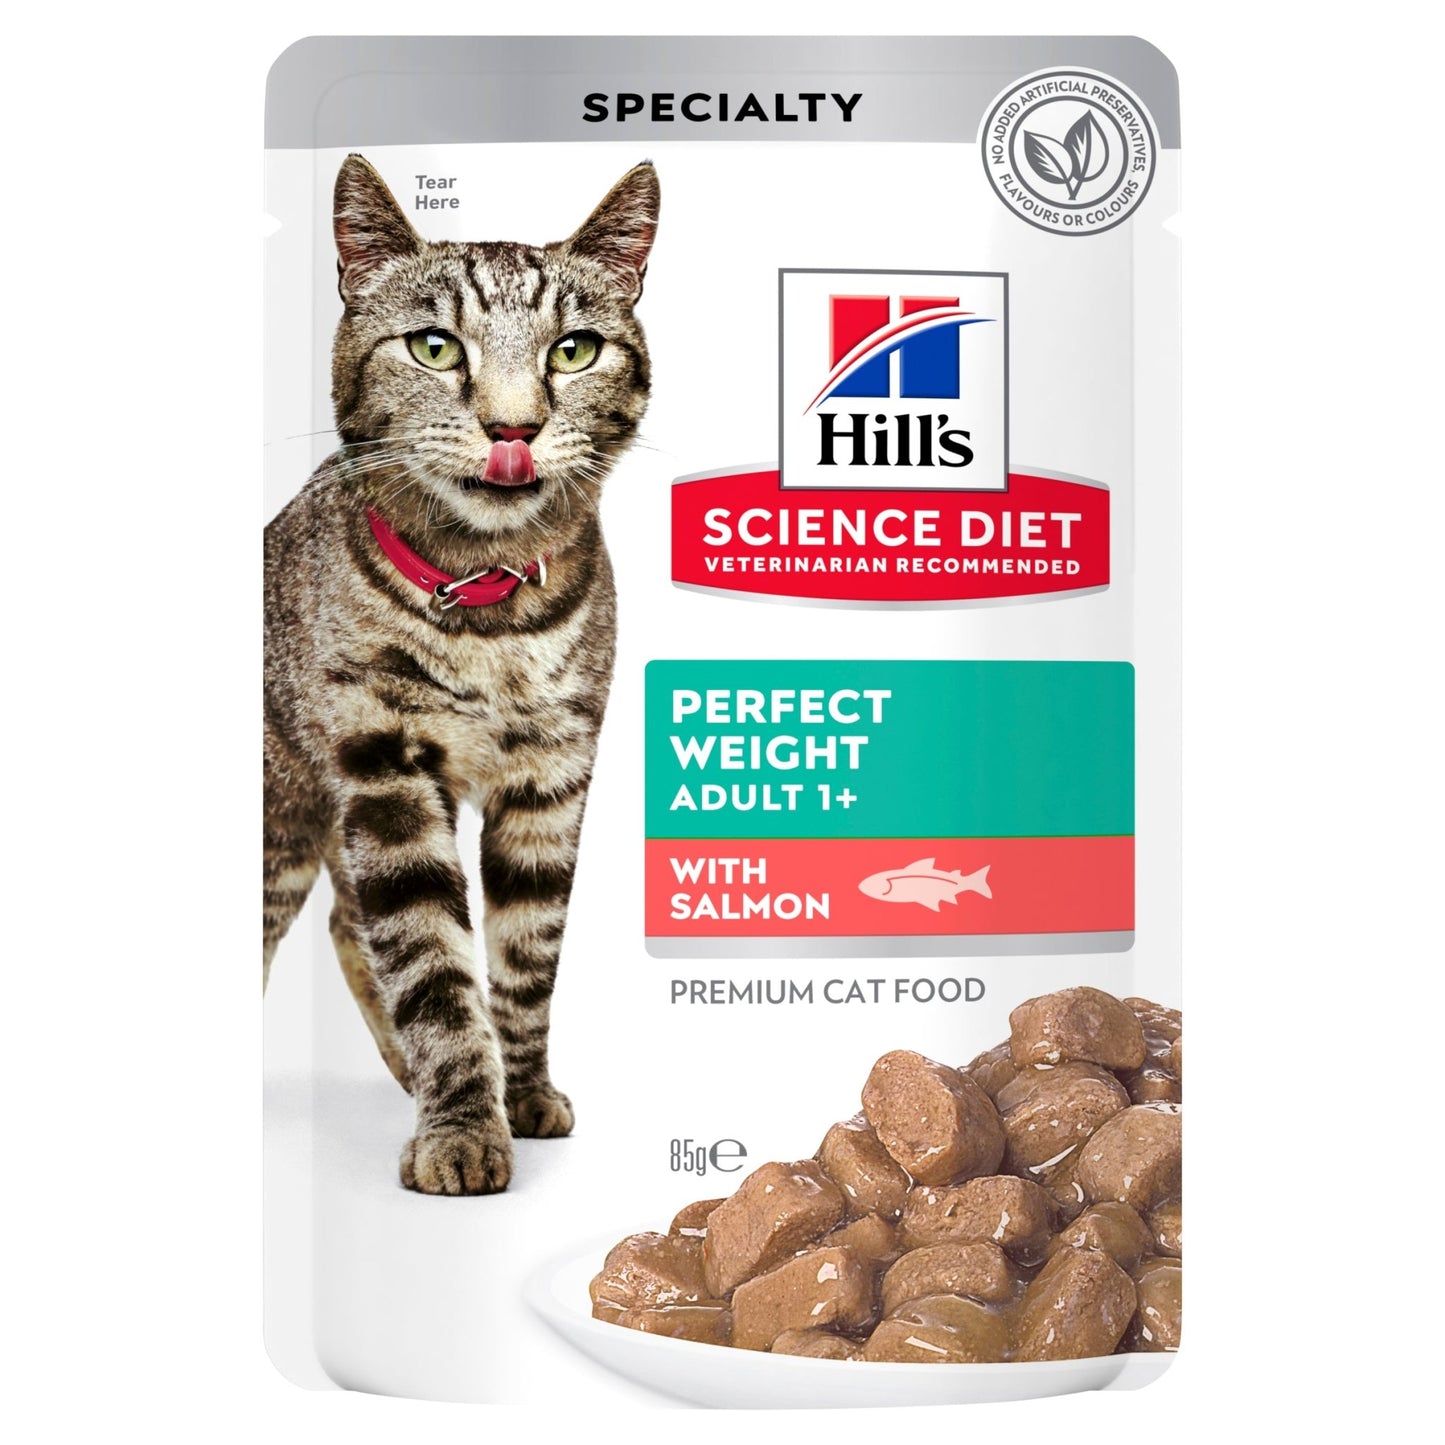 Hill's Science Diet Adult Perfect Weight Salmon Cat Food pouches 12x85g - Woonona Petfood & Produce